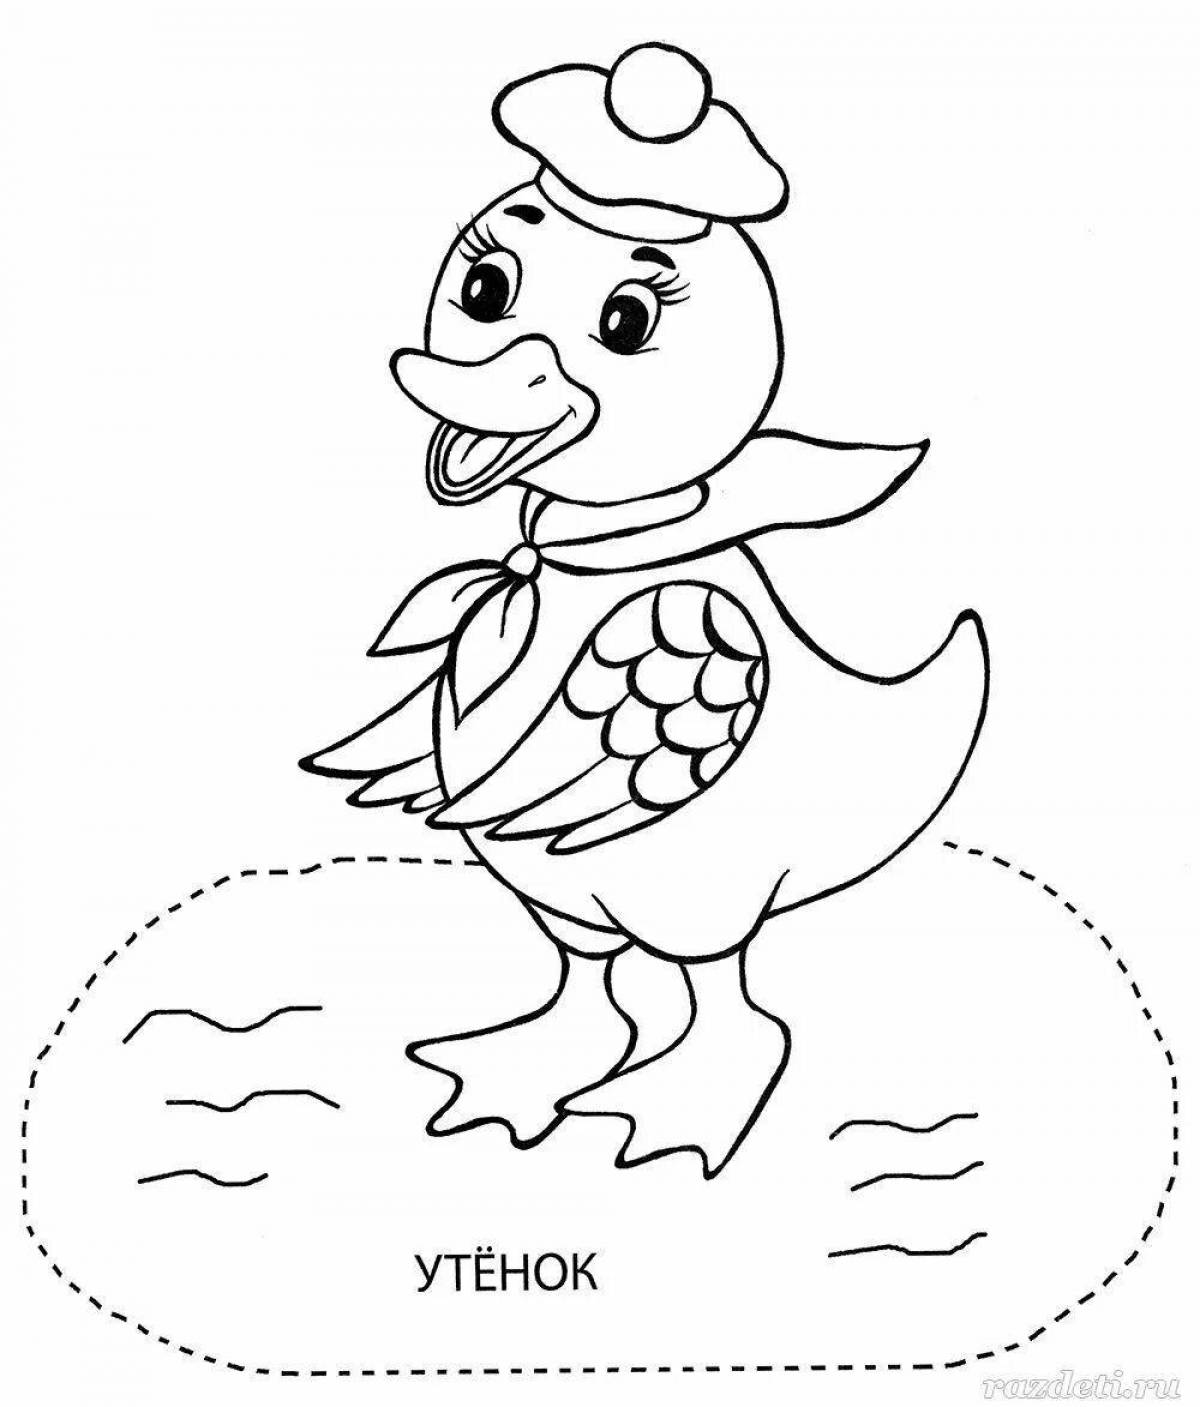 Soft duck coloring page